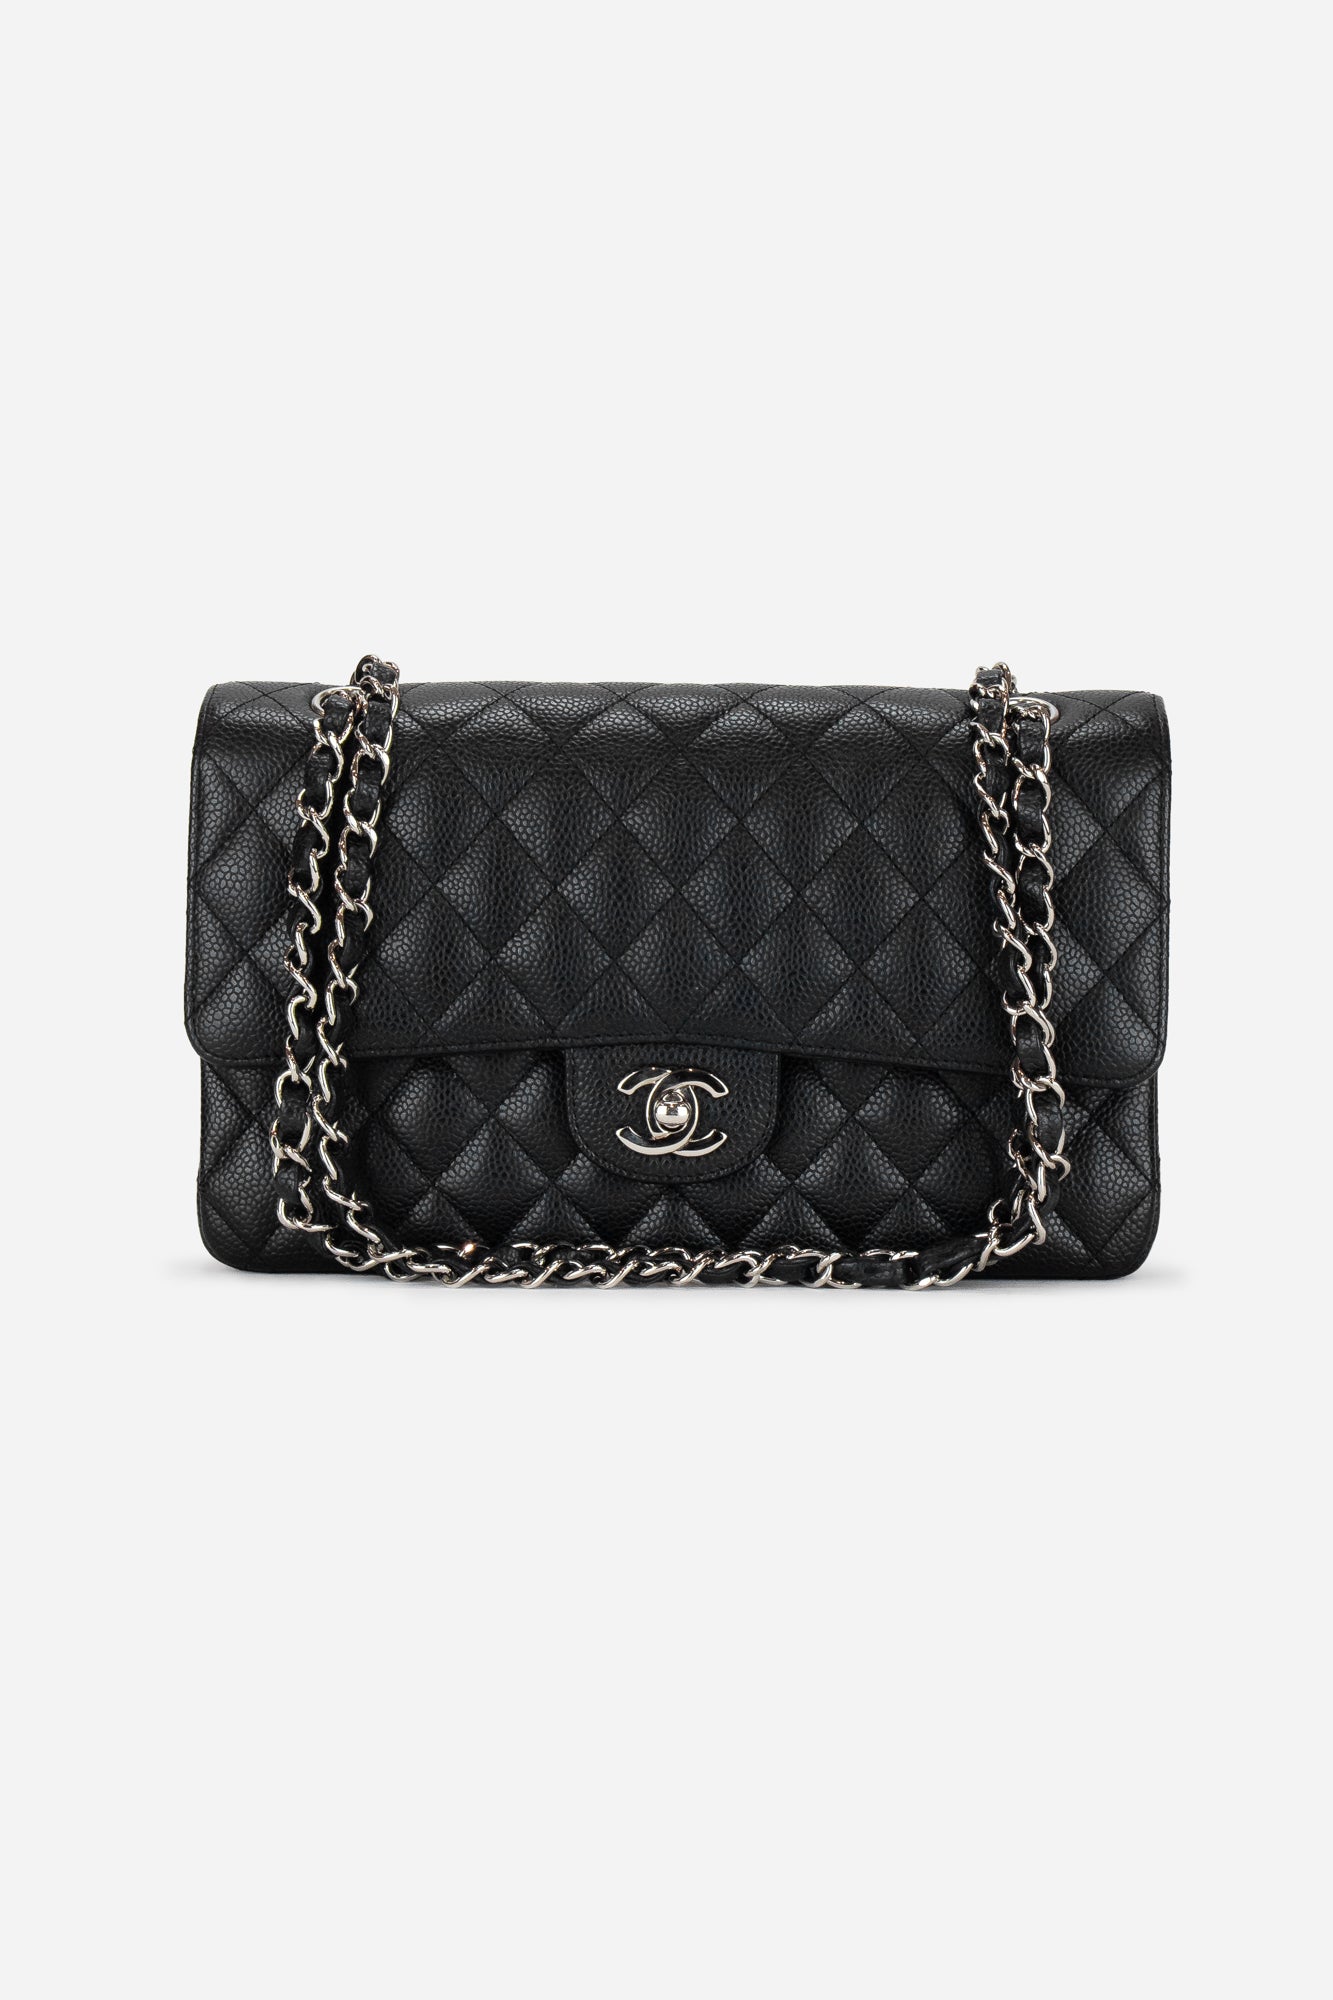 CHANEL Shiny Lambskin Quilted Small Fashion Therapy Bowling Bag